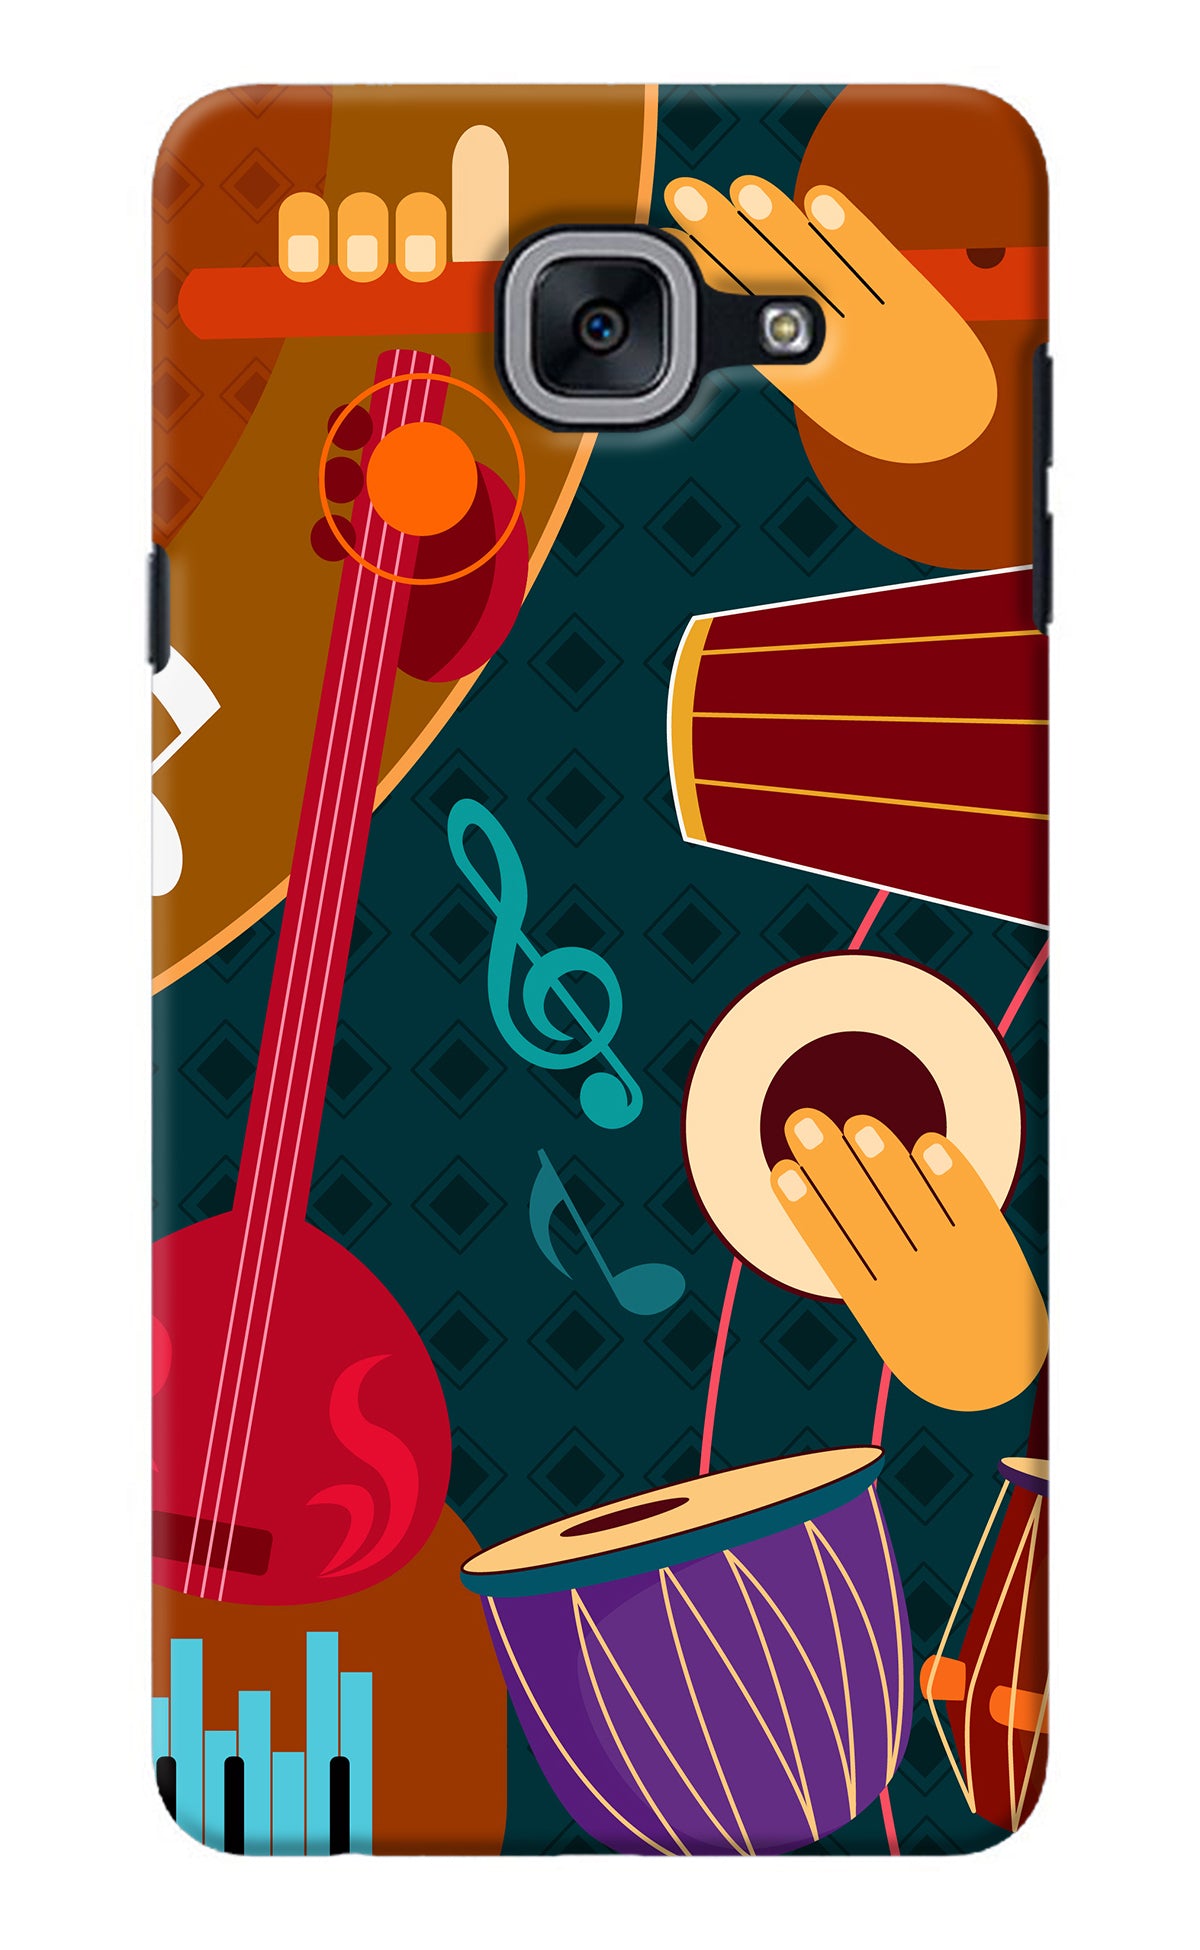 Music Instrument Samsung J7 Max Back Cover